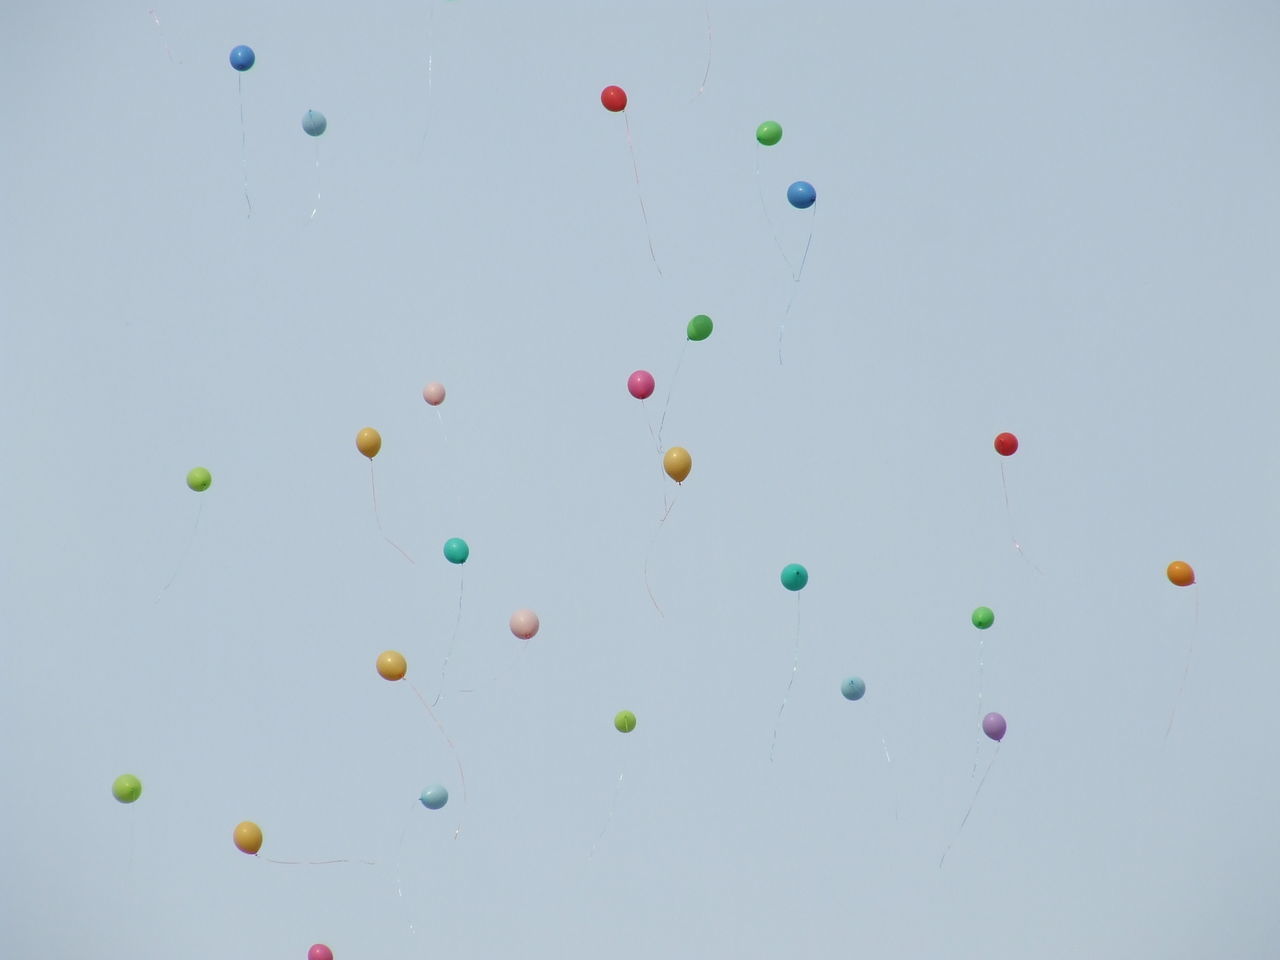 LOW ANGLE VIEW OF BALLOONS AGAINST SKY OVER WHITE BACKGROUND